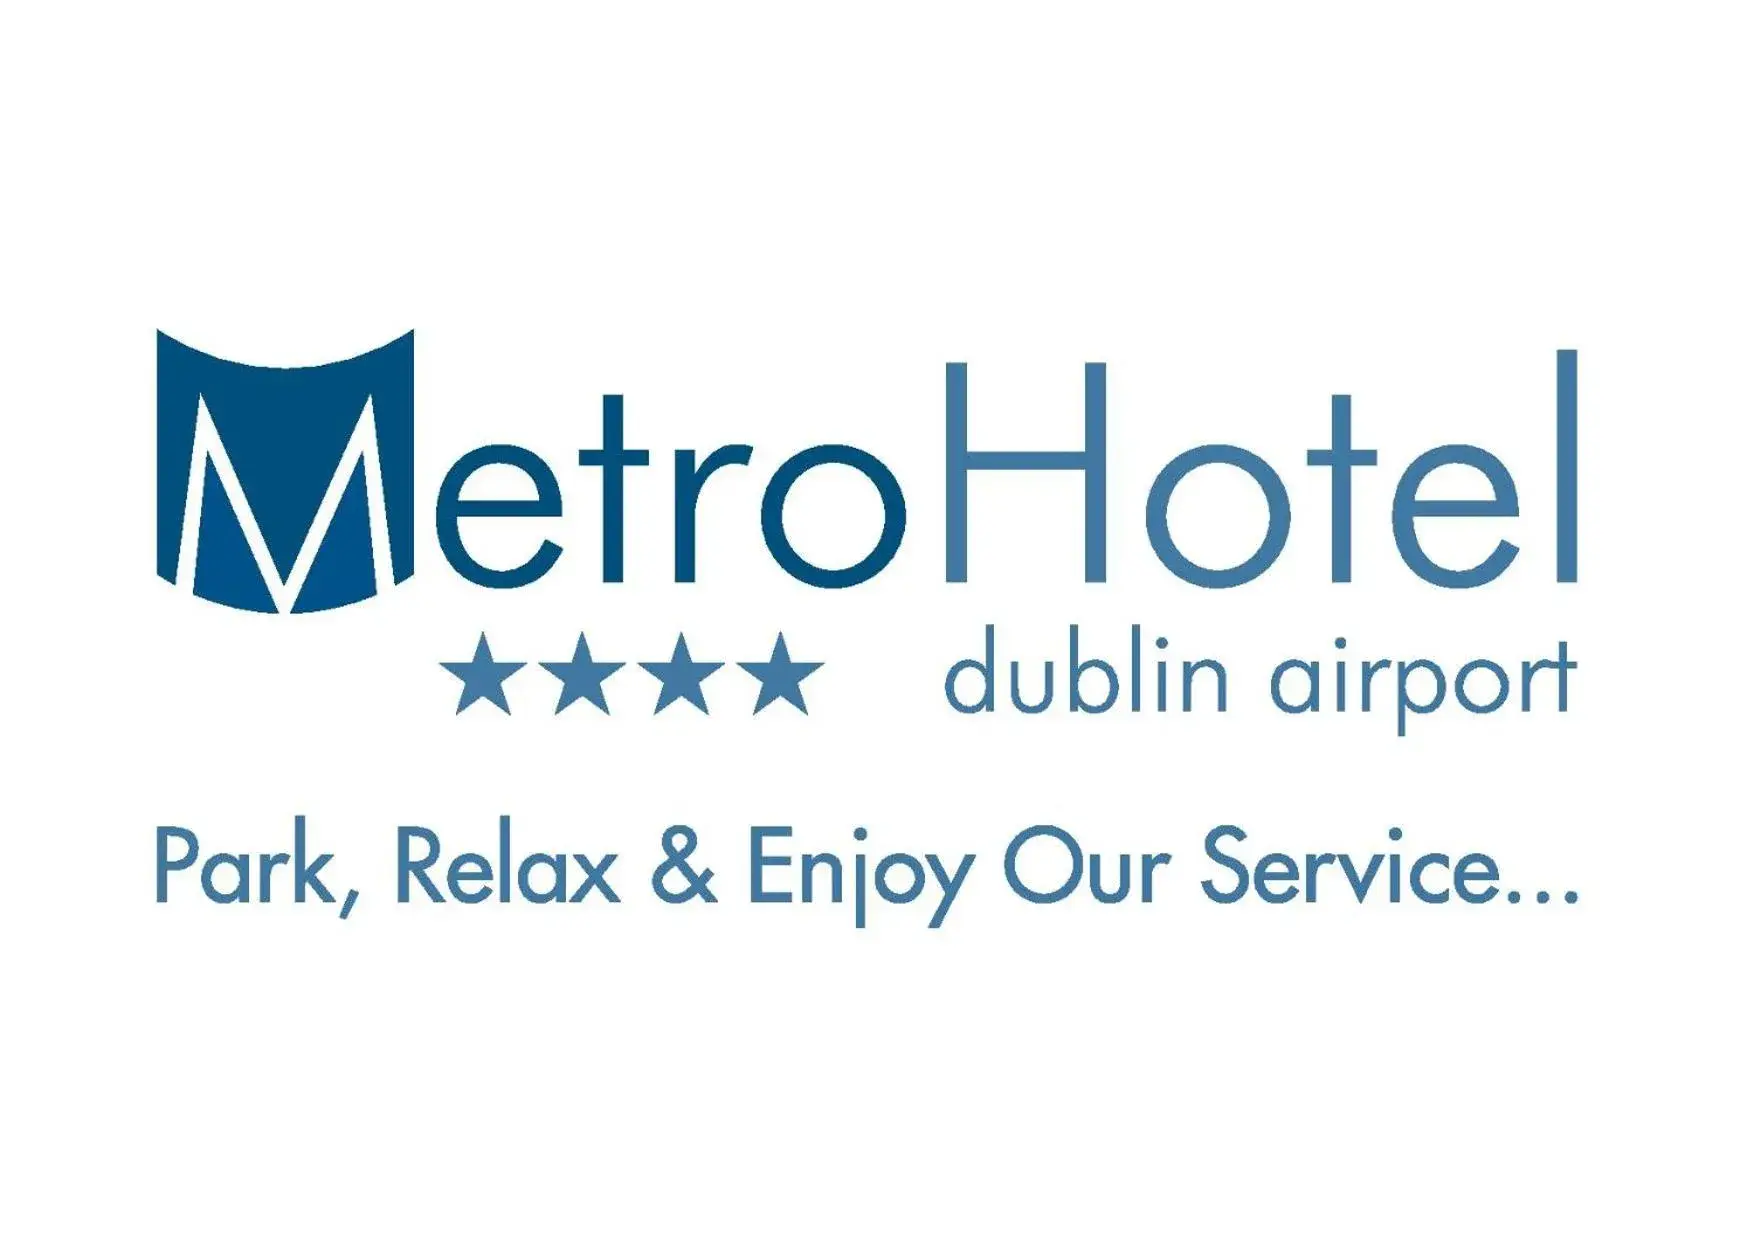 Property logo or sign in Metro Hotel Dublin Airport